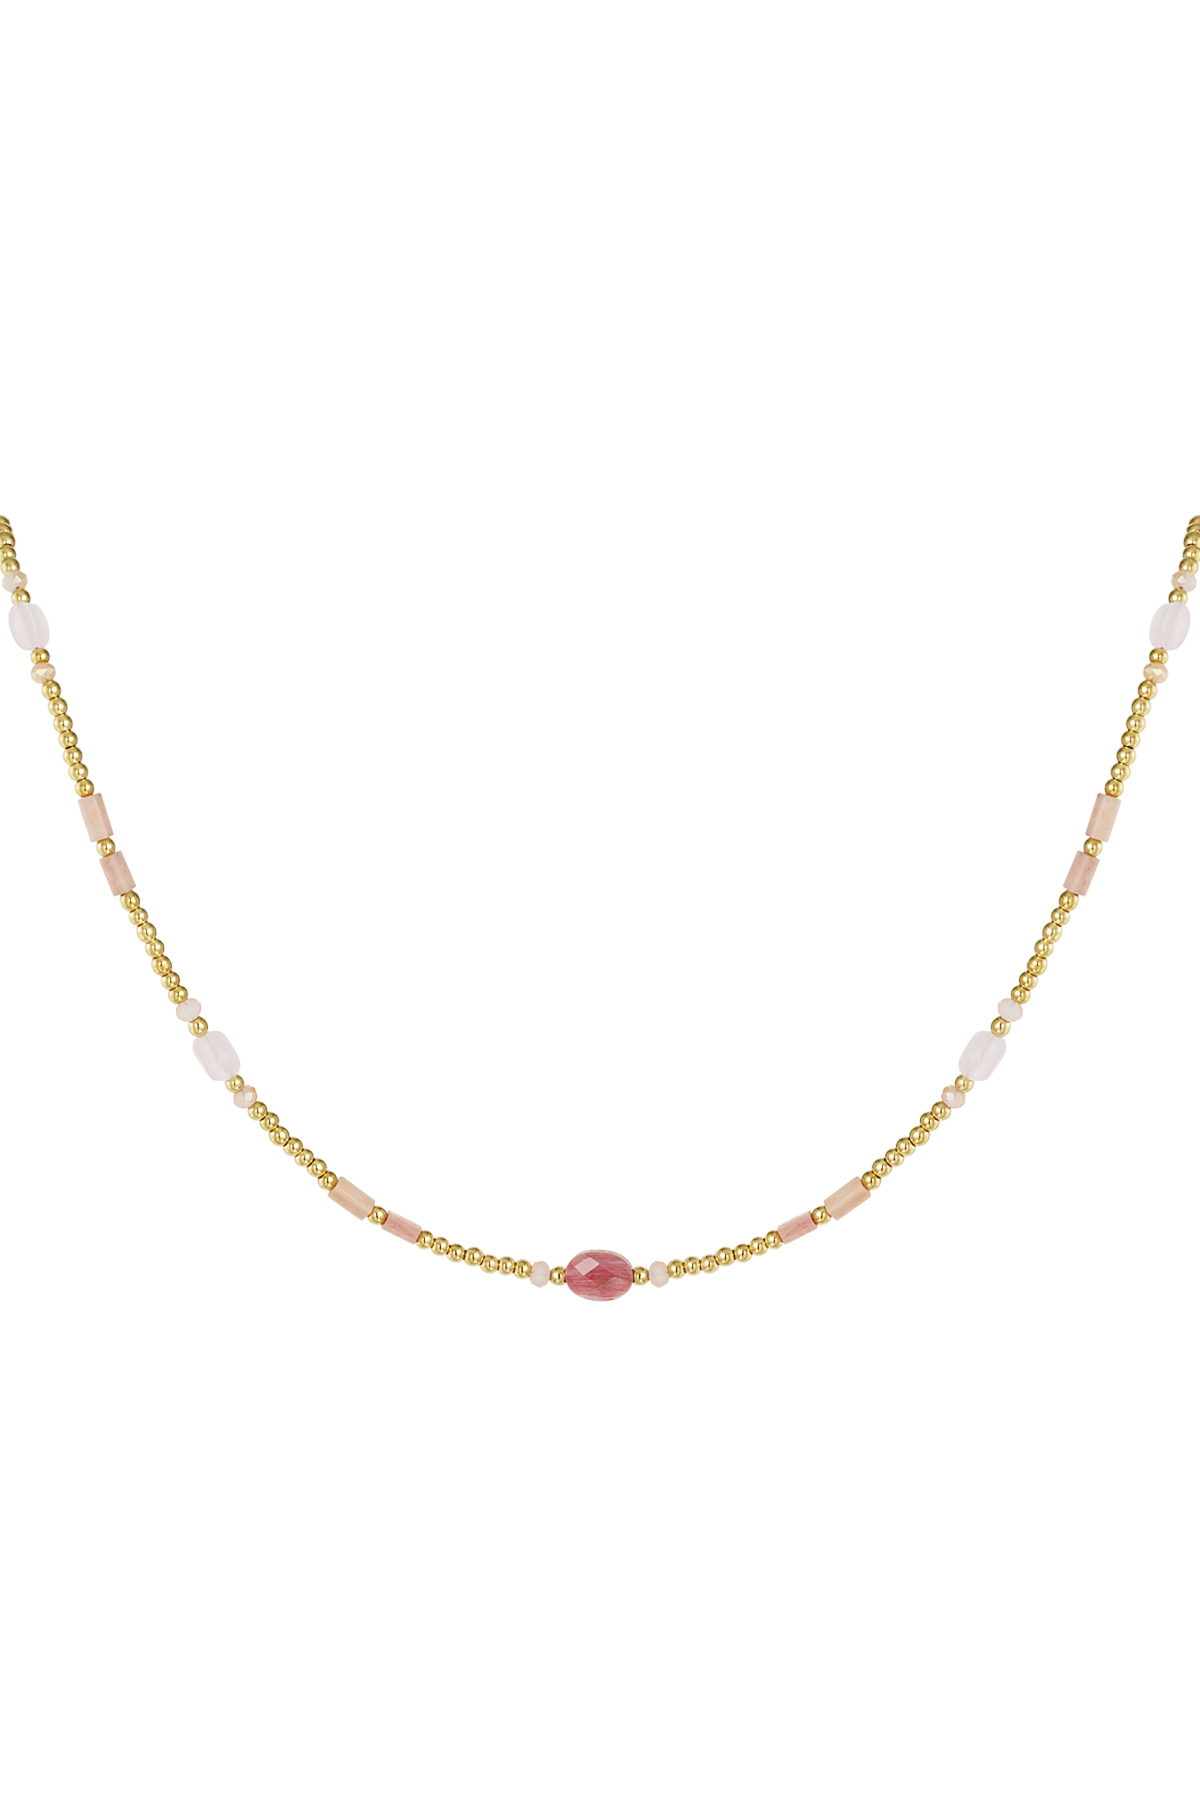 Beaded necklace colorful details - pink & gold Stainless Steel h5 